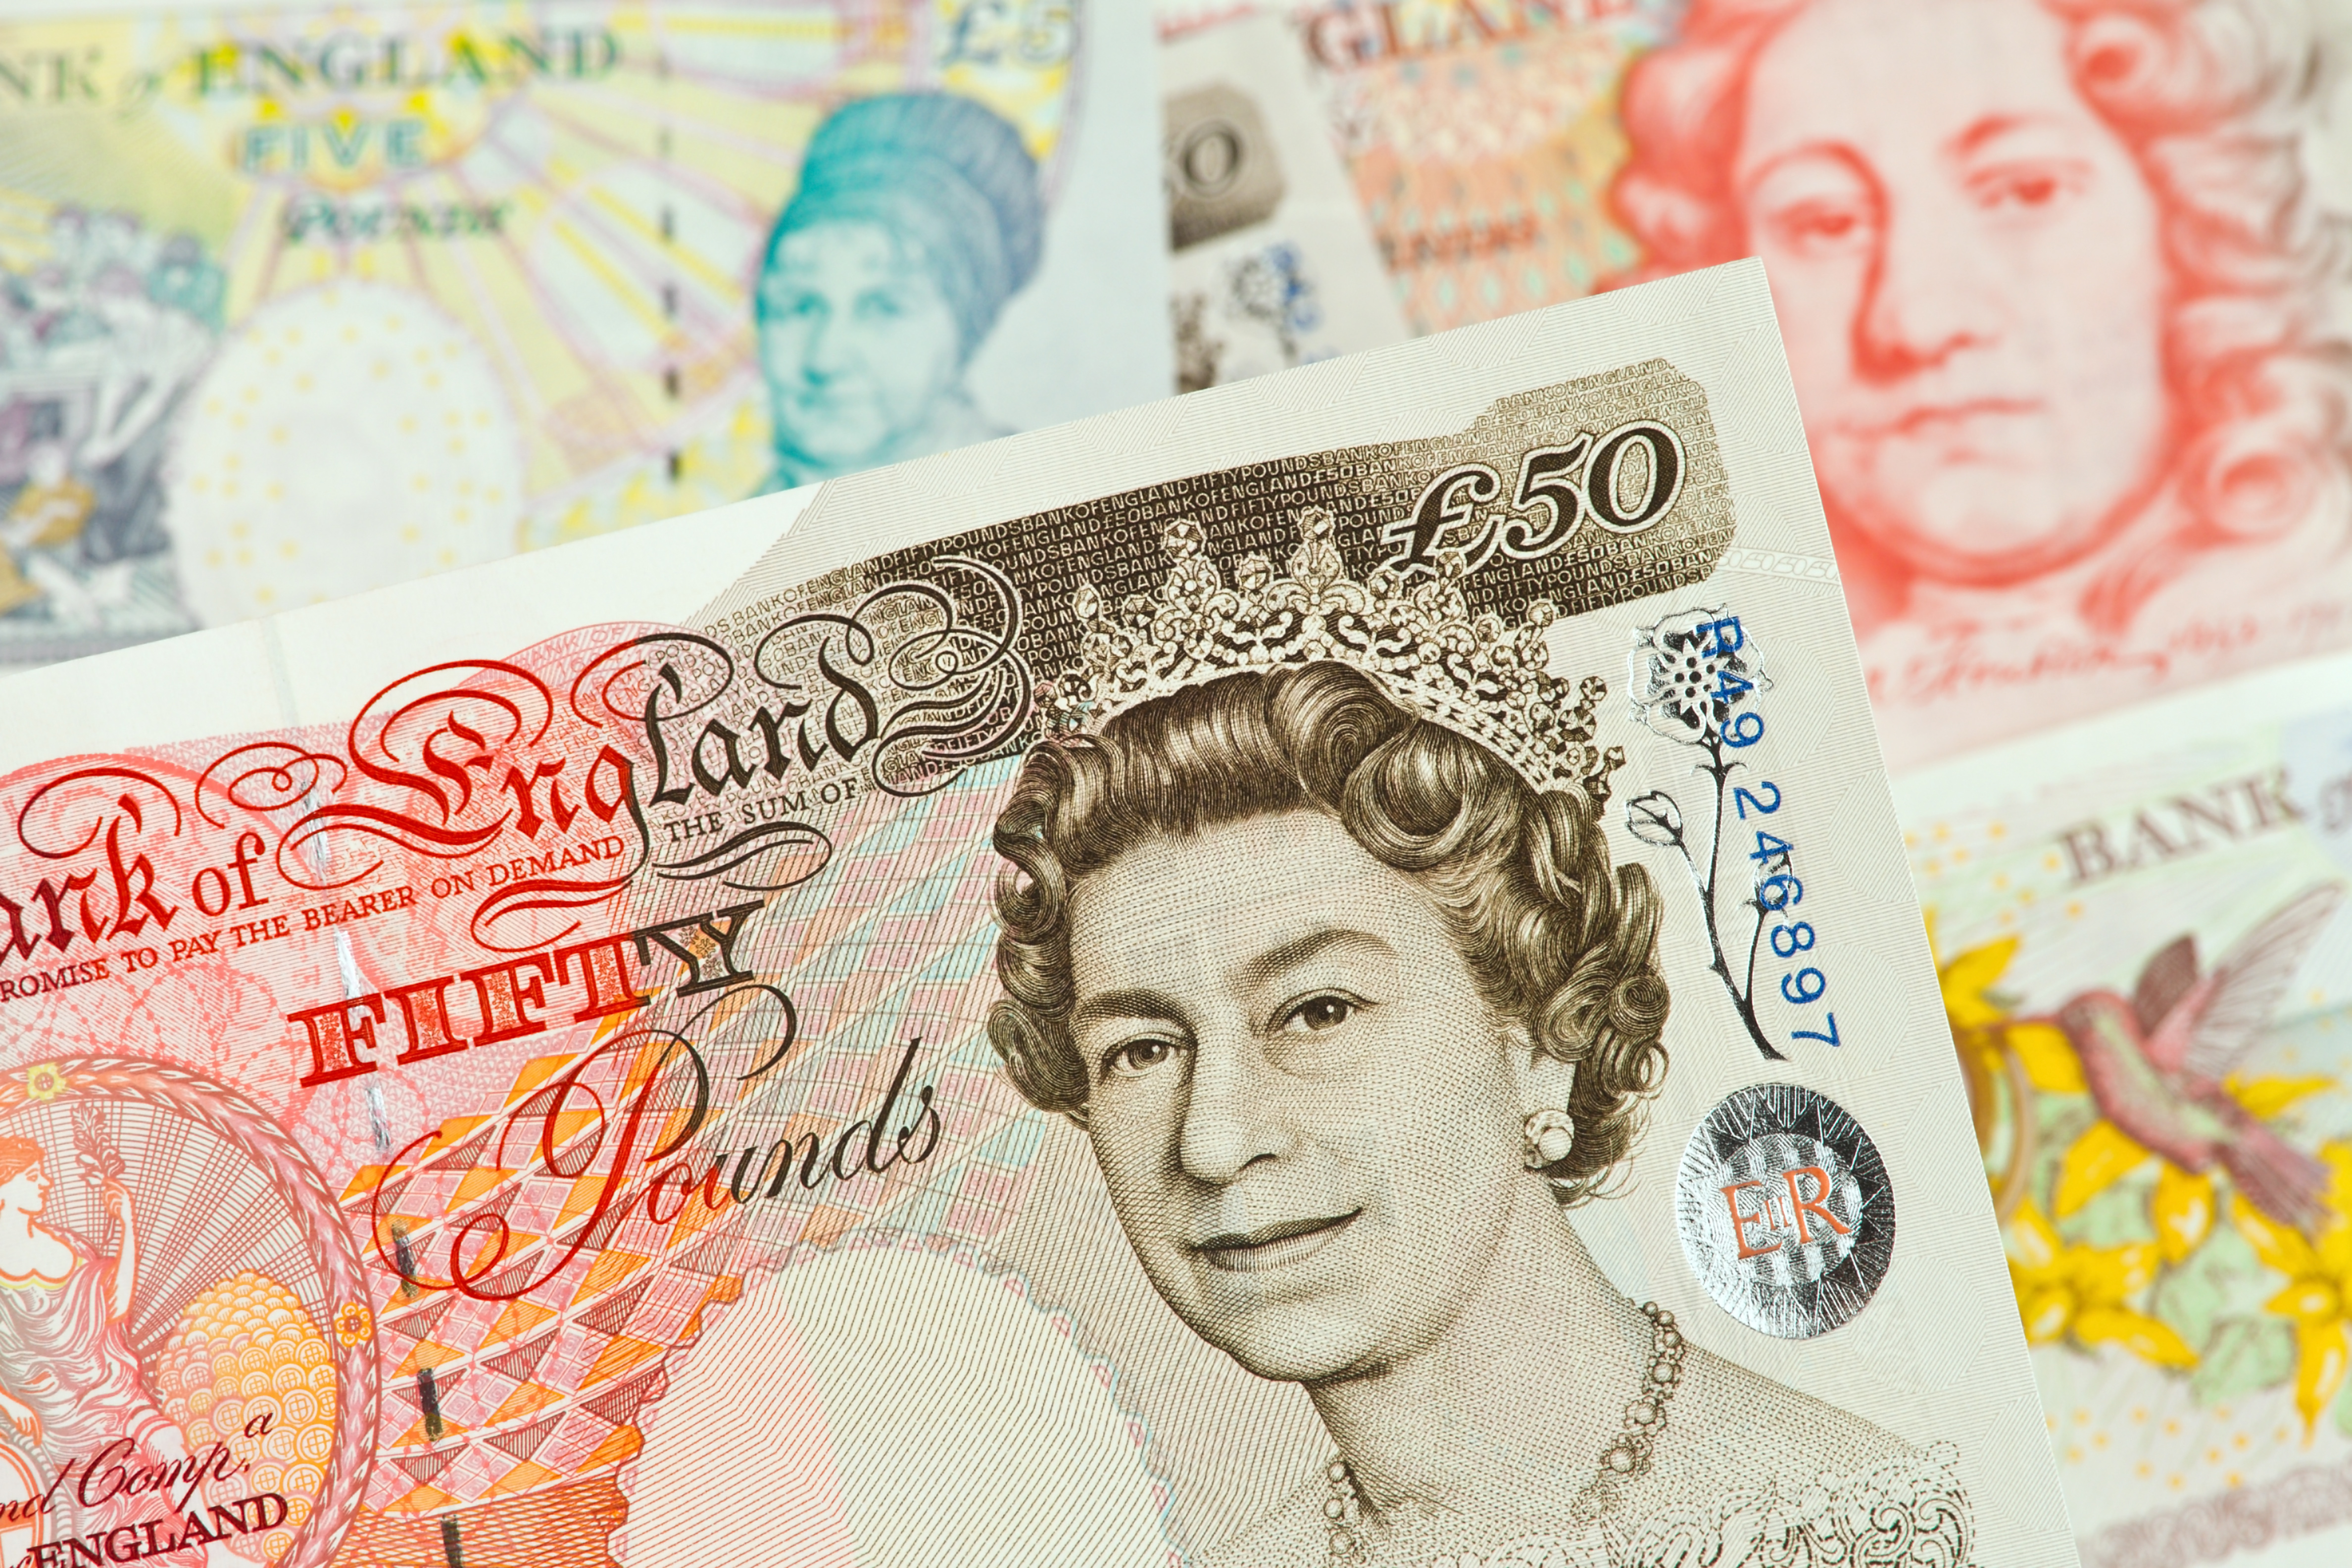 British pound notes. British pounds. Banknotes of the British currency.